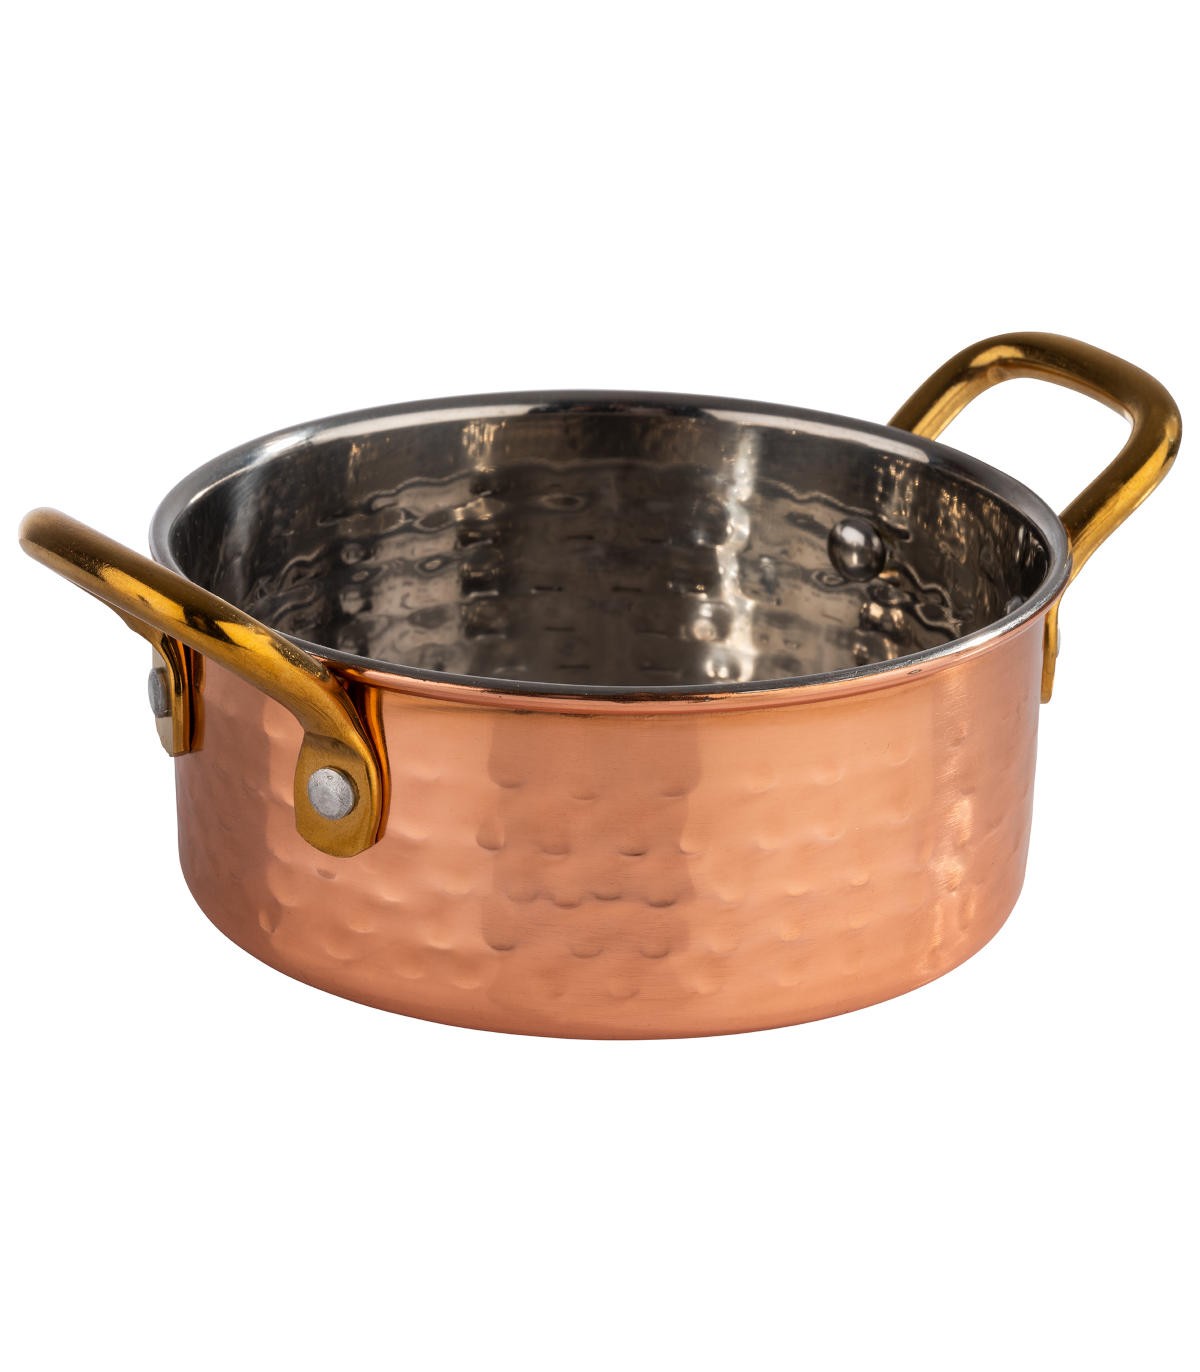 Small pan Mumbai 0.25 L hammered stainless steel copper look